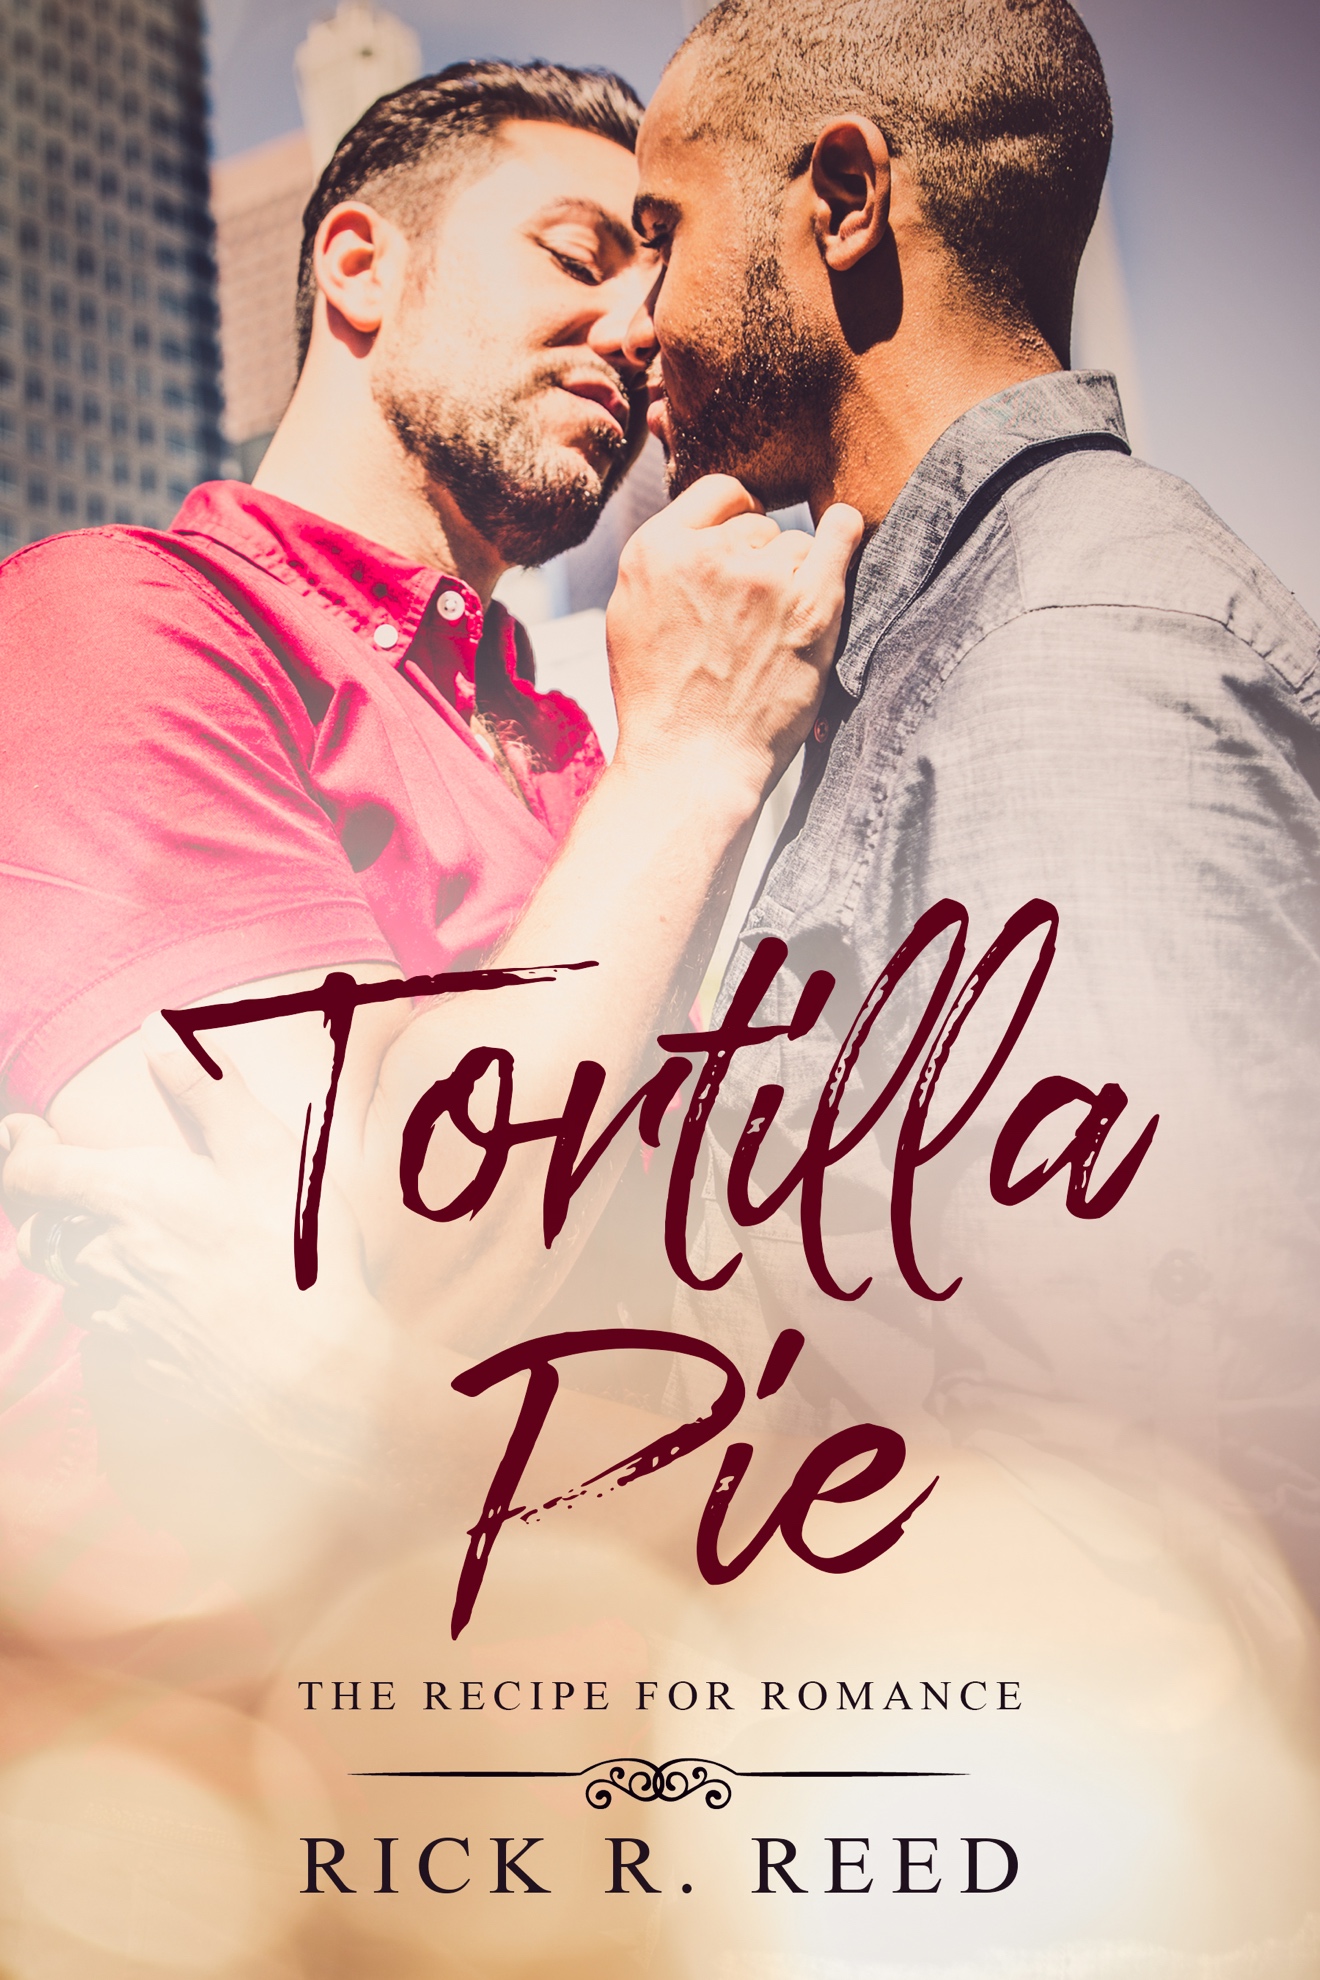 This image is the cover for the book Tortilla Pie